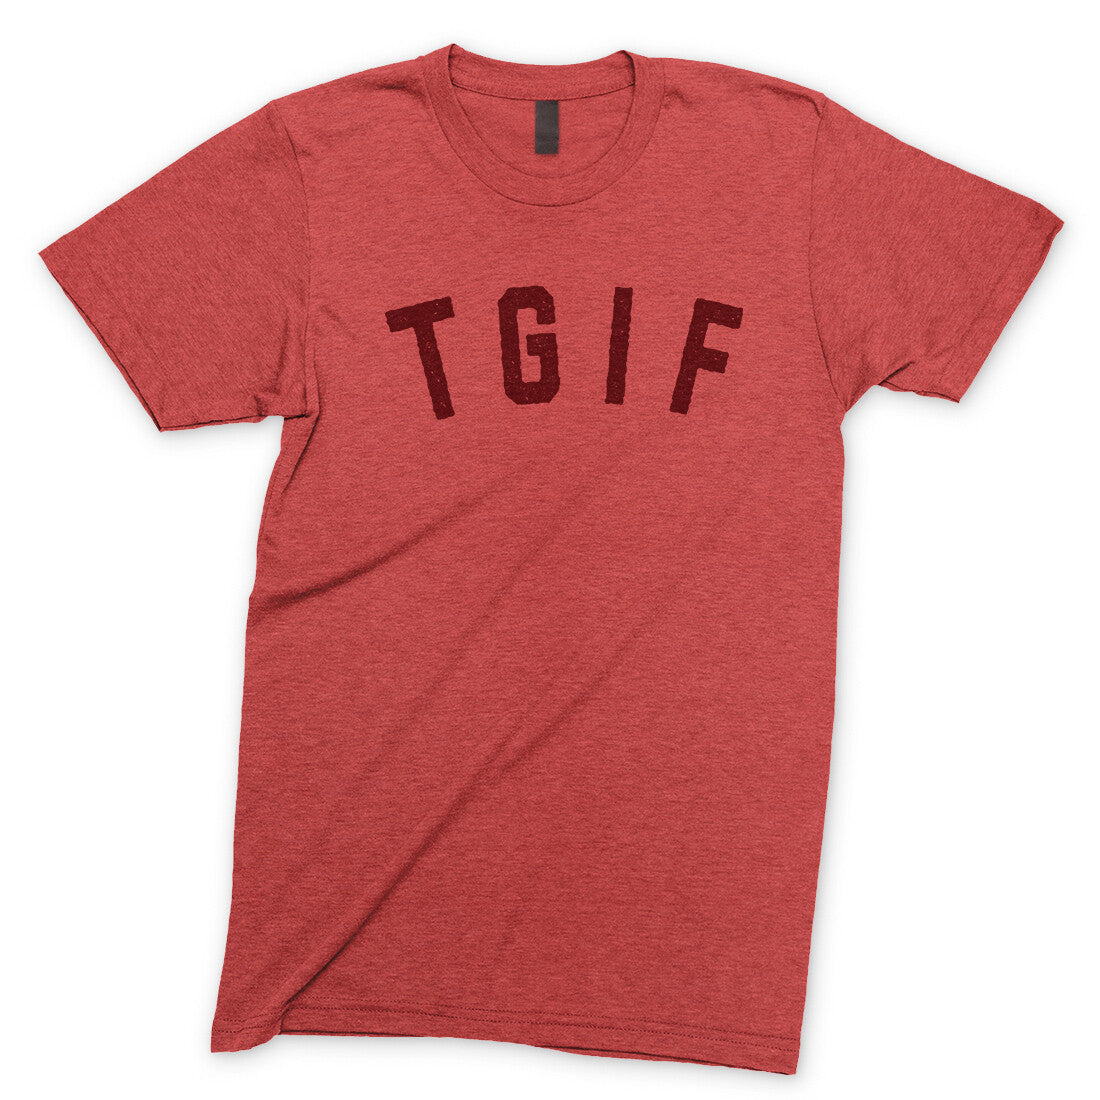 TGIF in Heather Red Color